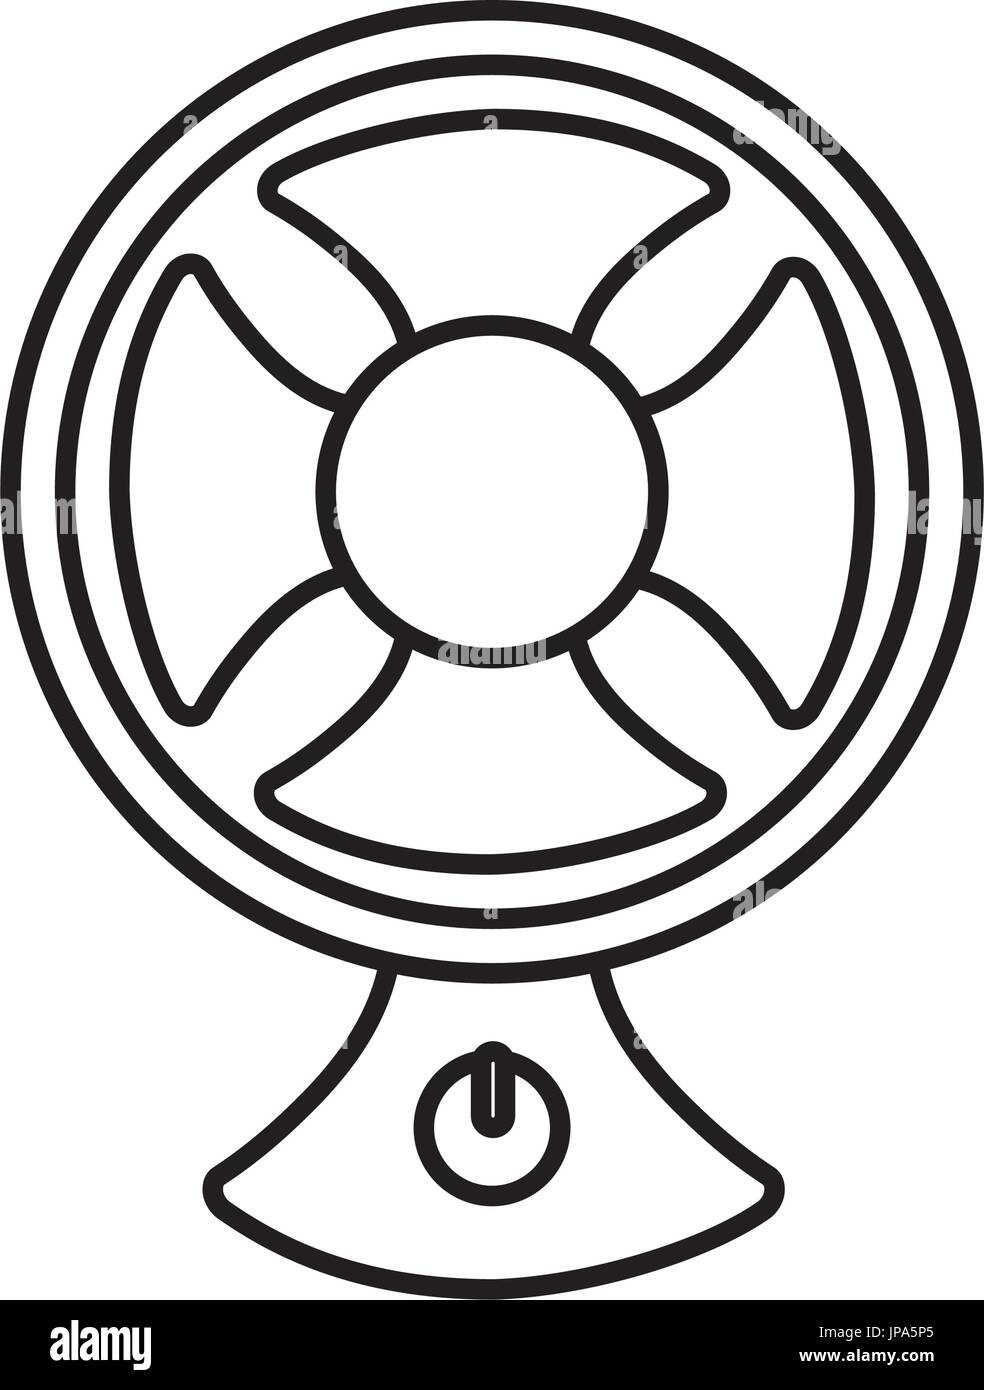 fan icon over white background vector illustration Stock Vector